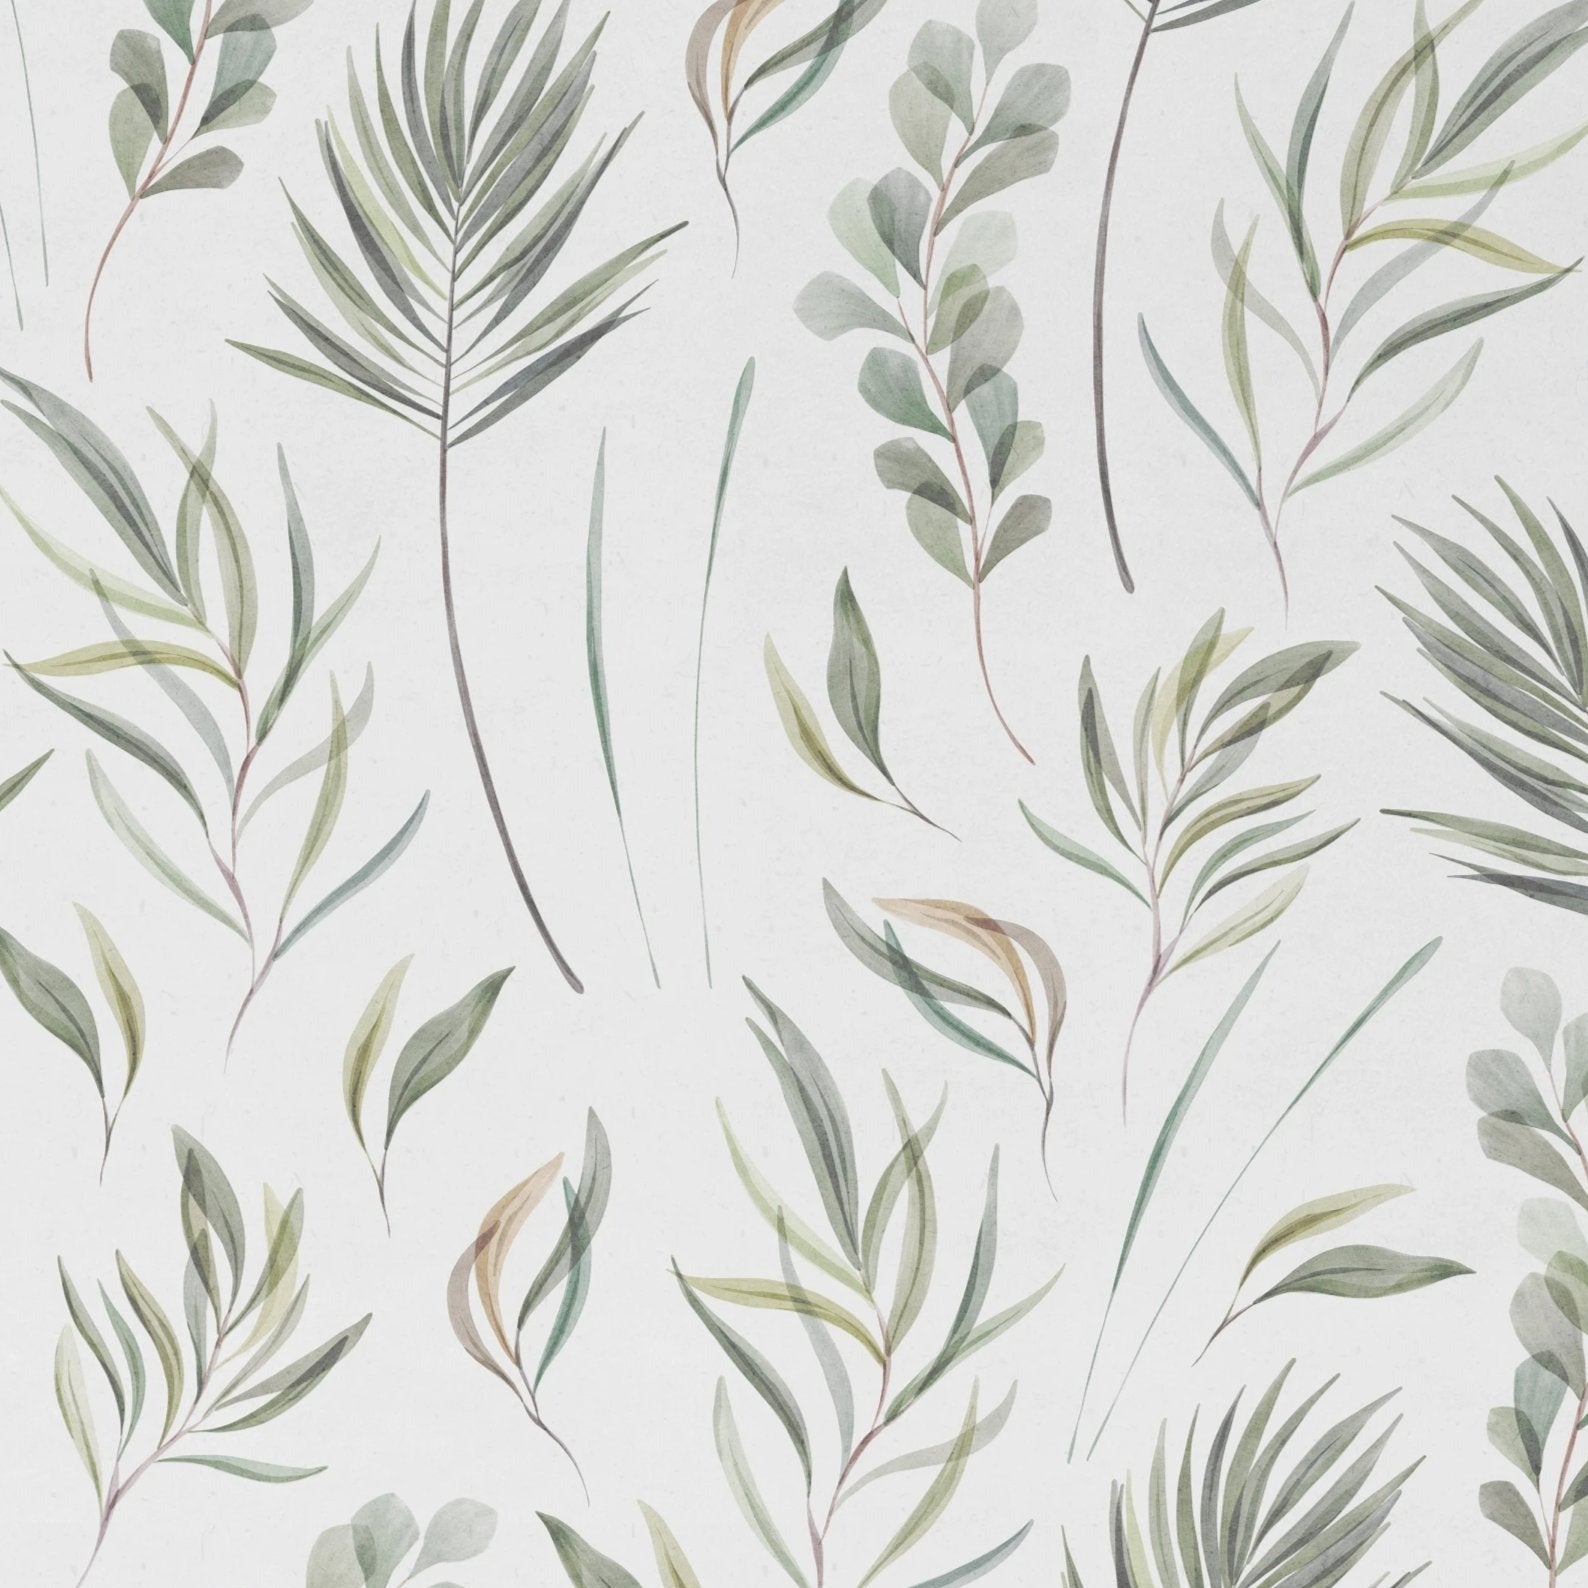 A close-up of the Green Floral Wallpaper, illustrating its detailed watercolor botanical pattern with various green foliage designs on a crisp white backdrop, perfect for adding a touch of nature to any space.